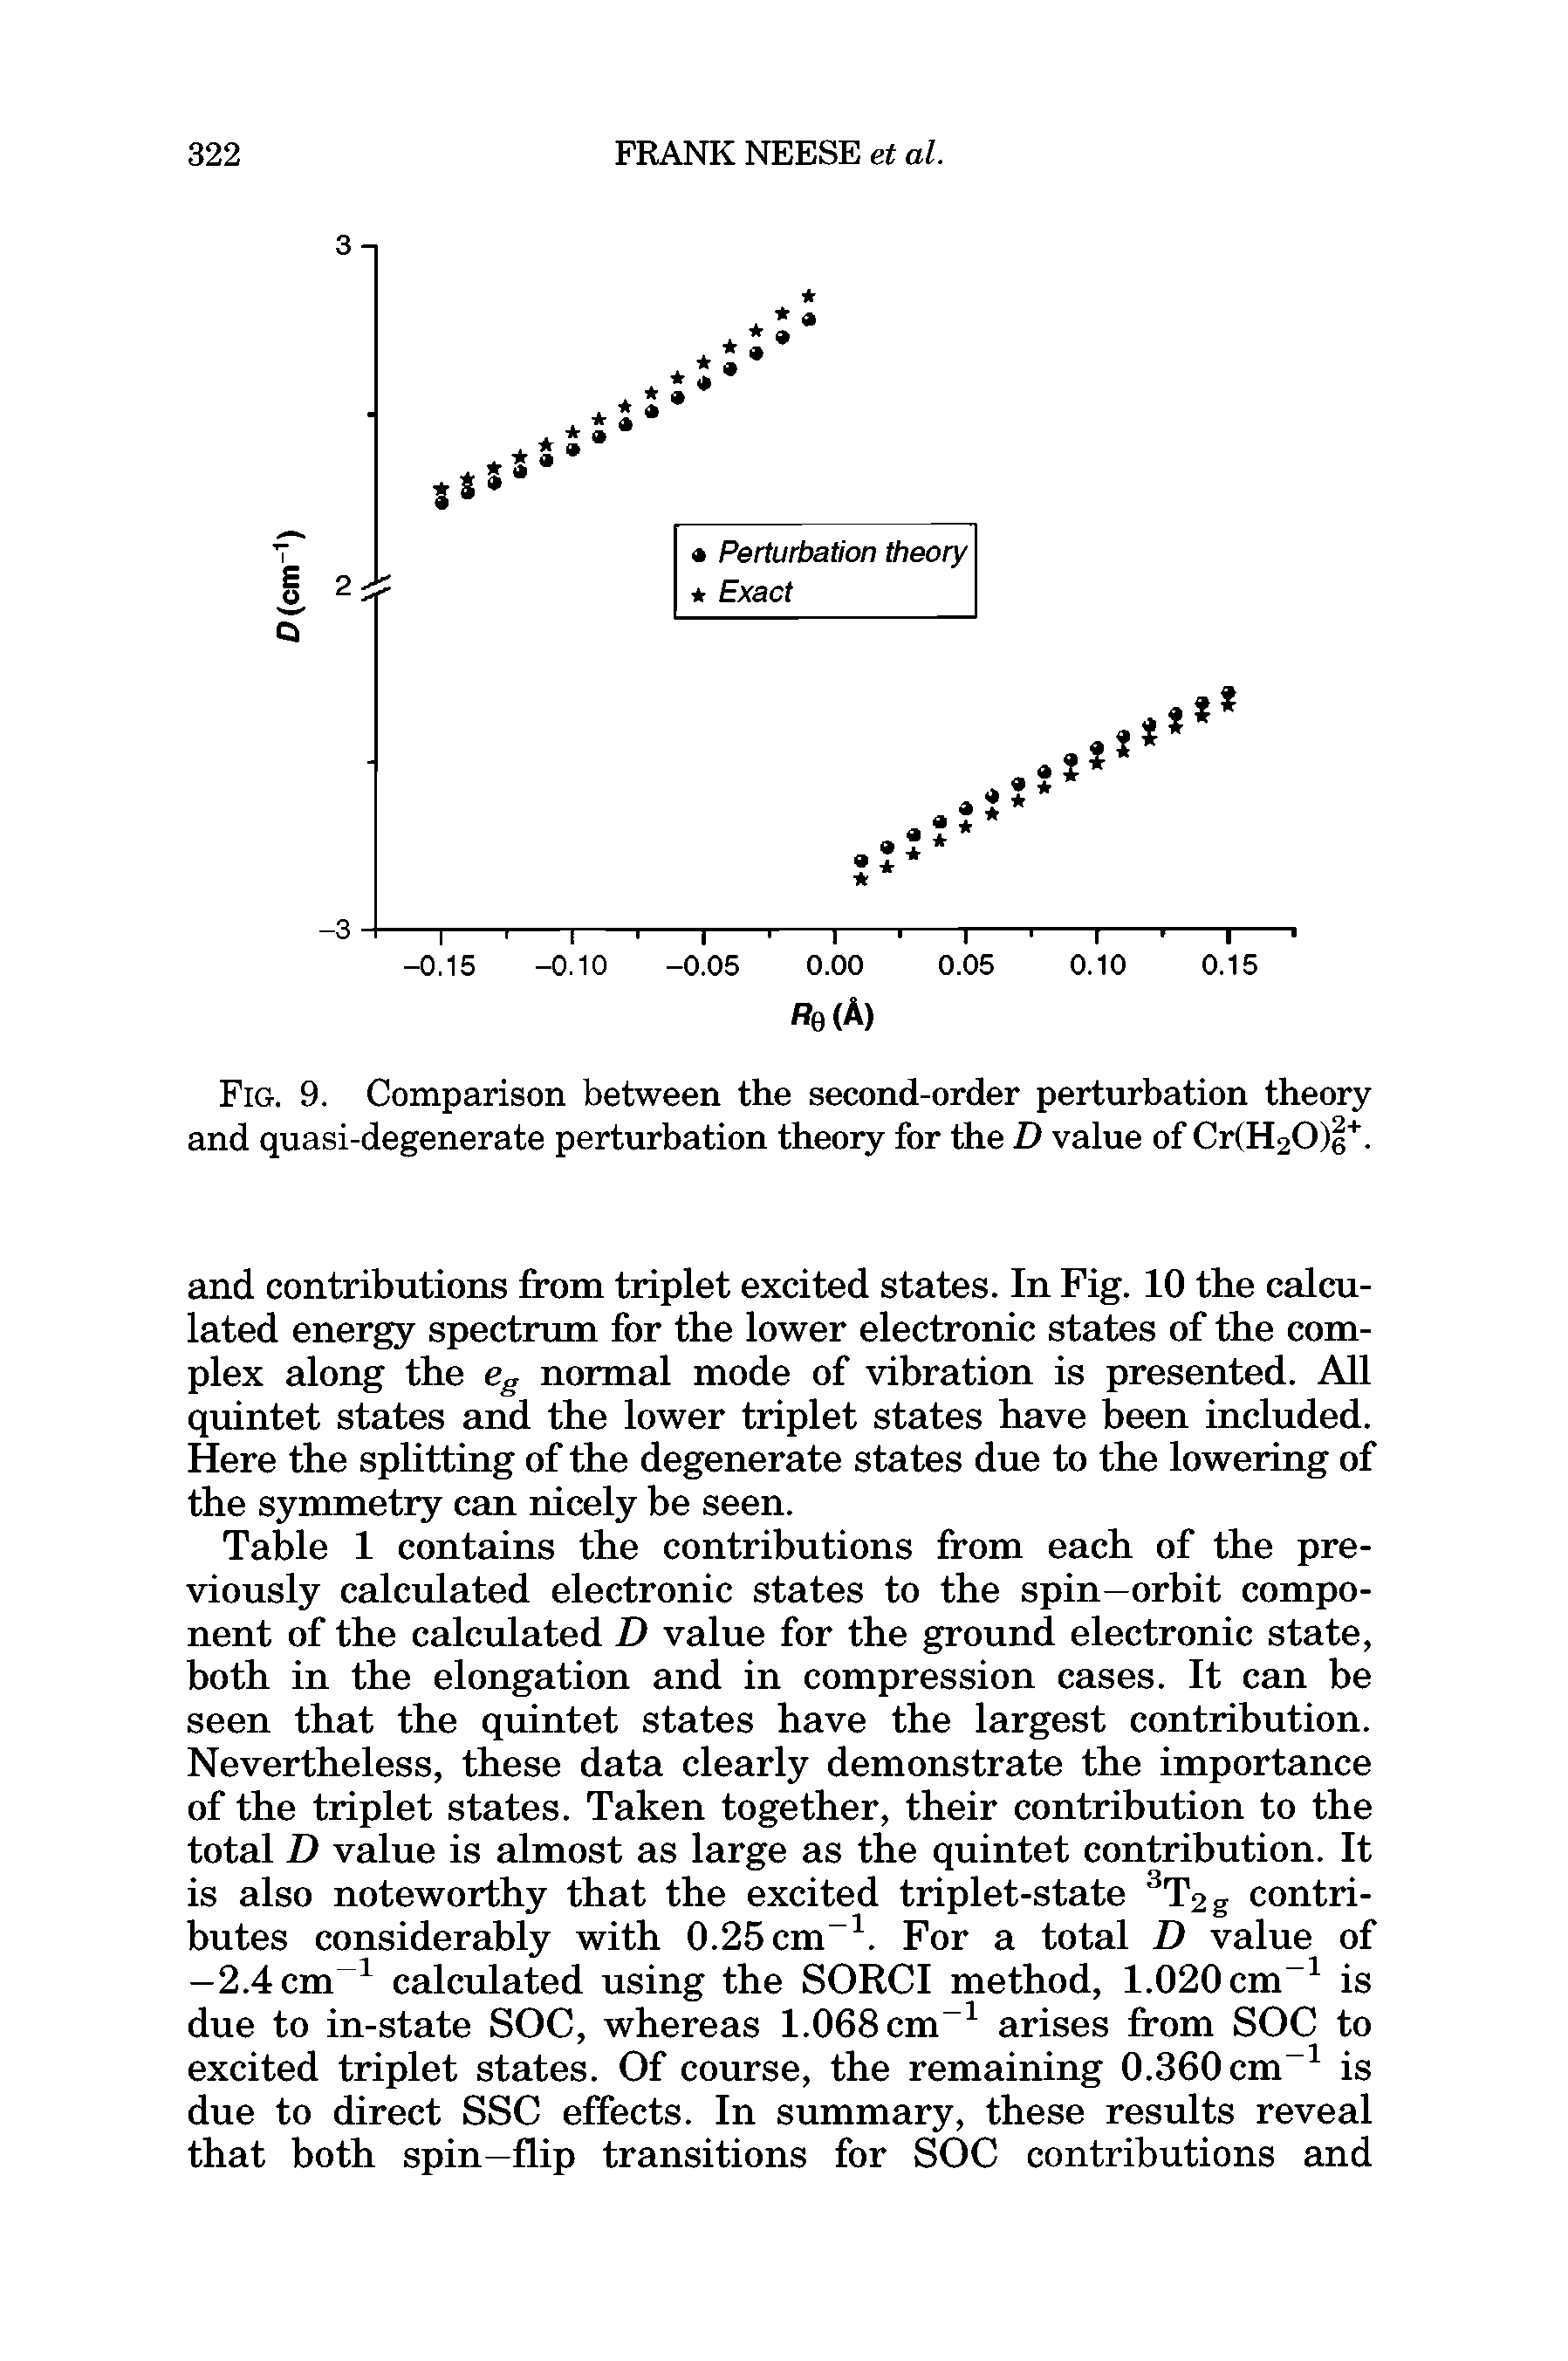 Fig. 9. Comparison between the second-order perturbation theory and quasi-degenerate perturbation theory for the D value of ( 20) +.